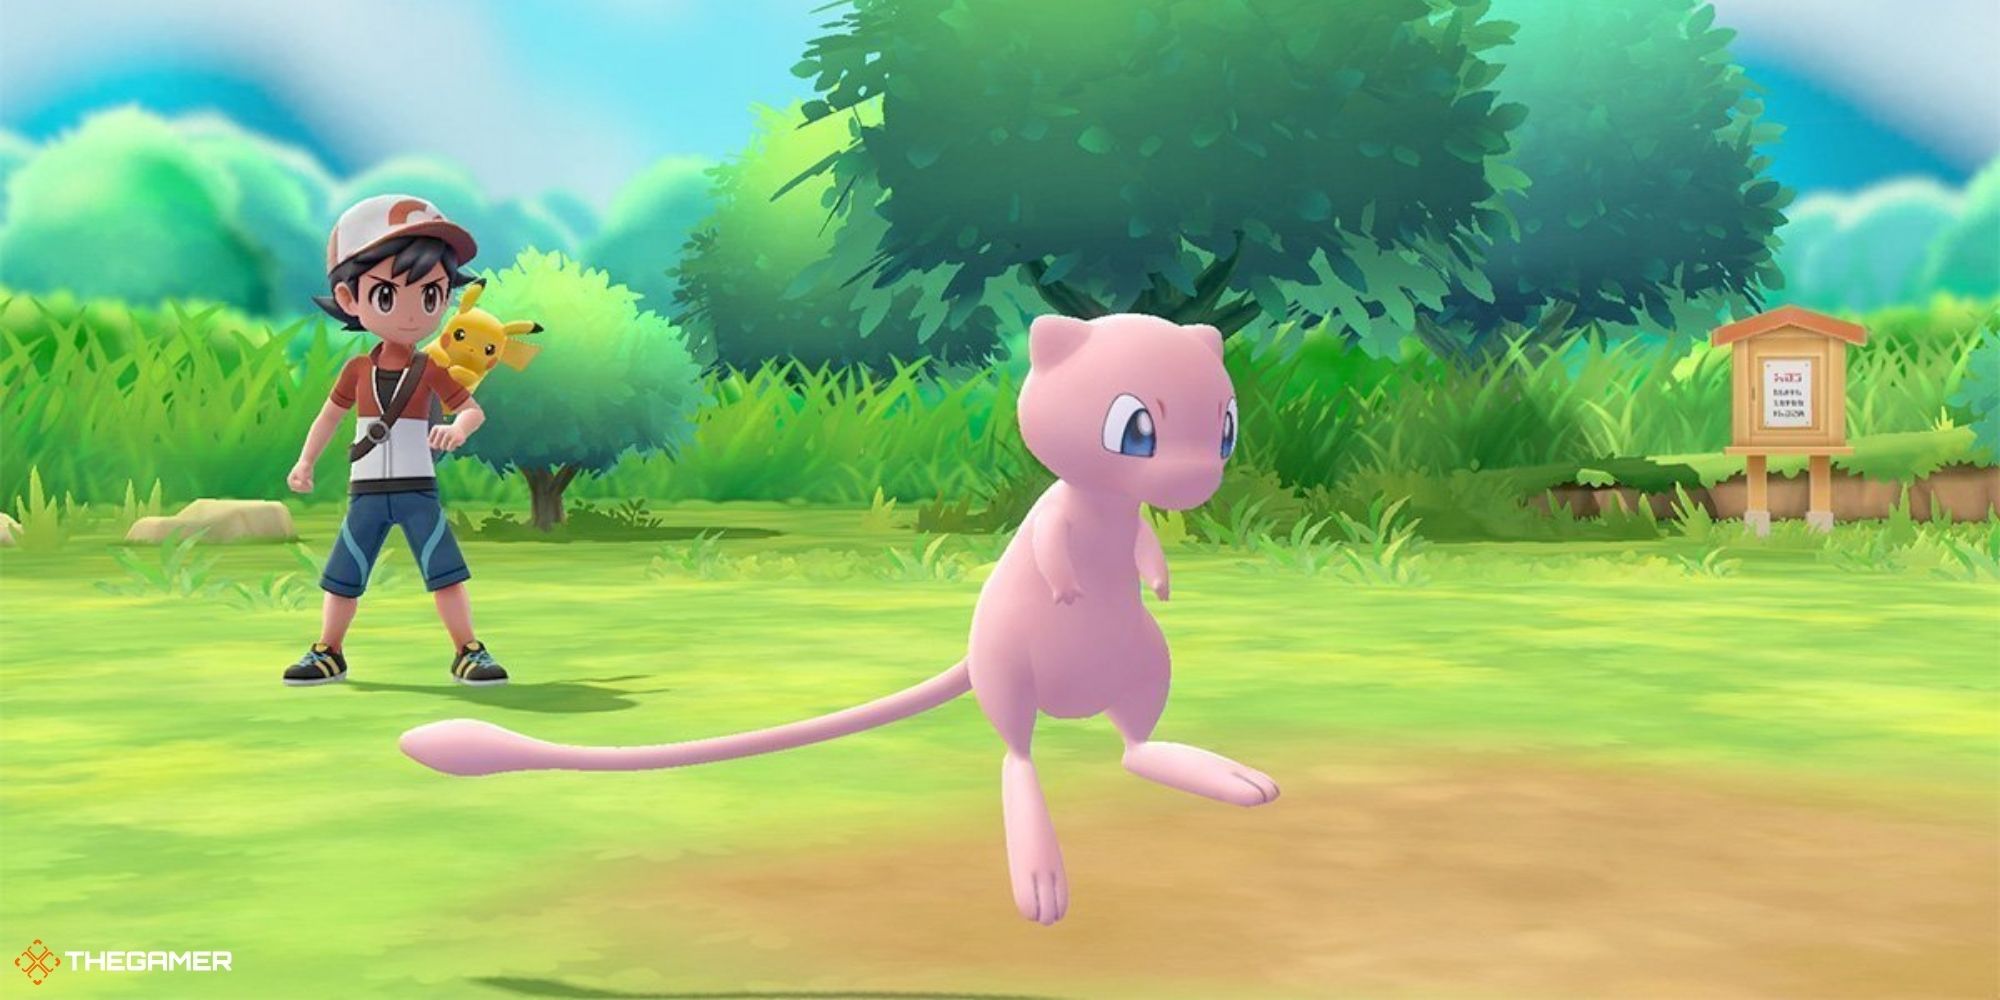 Let's Go Pikachu and Eevee - Mew in grassy field battle